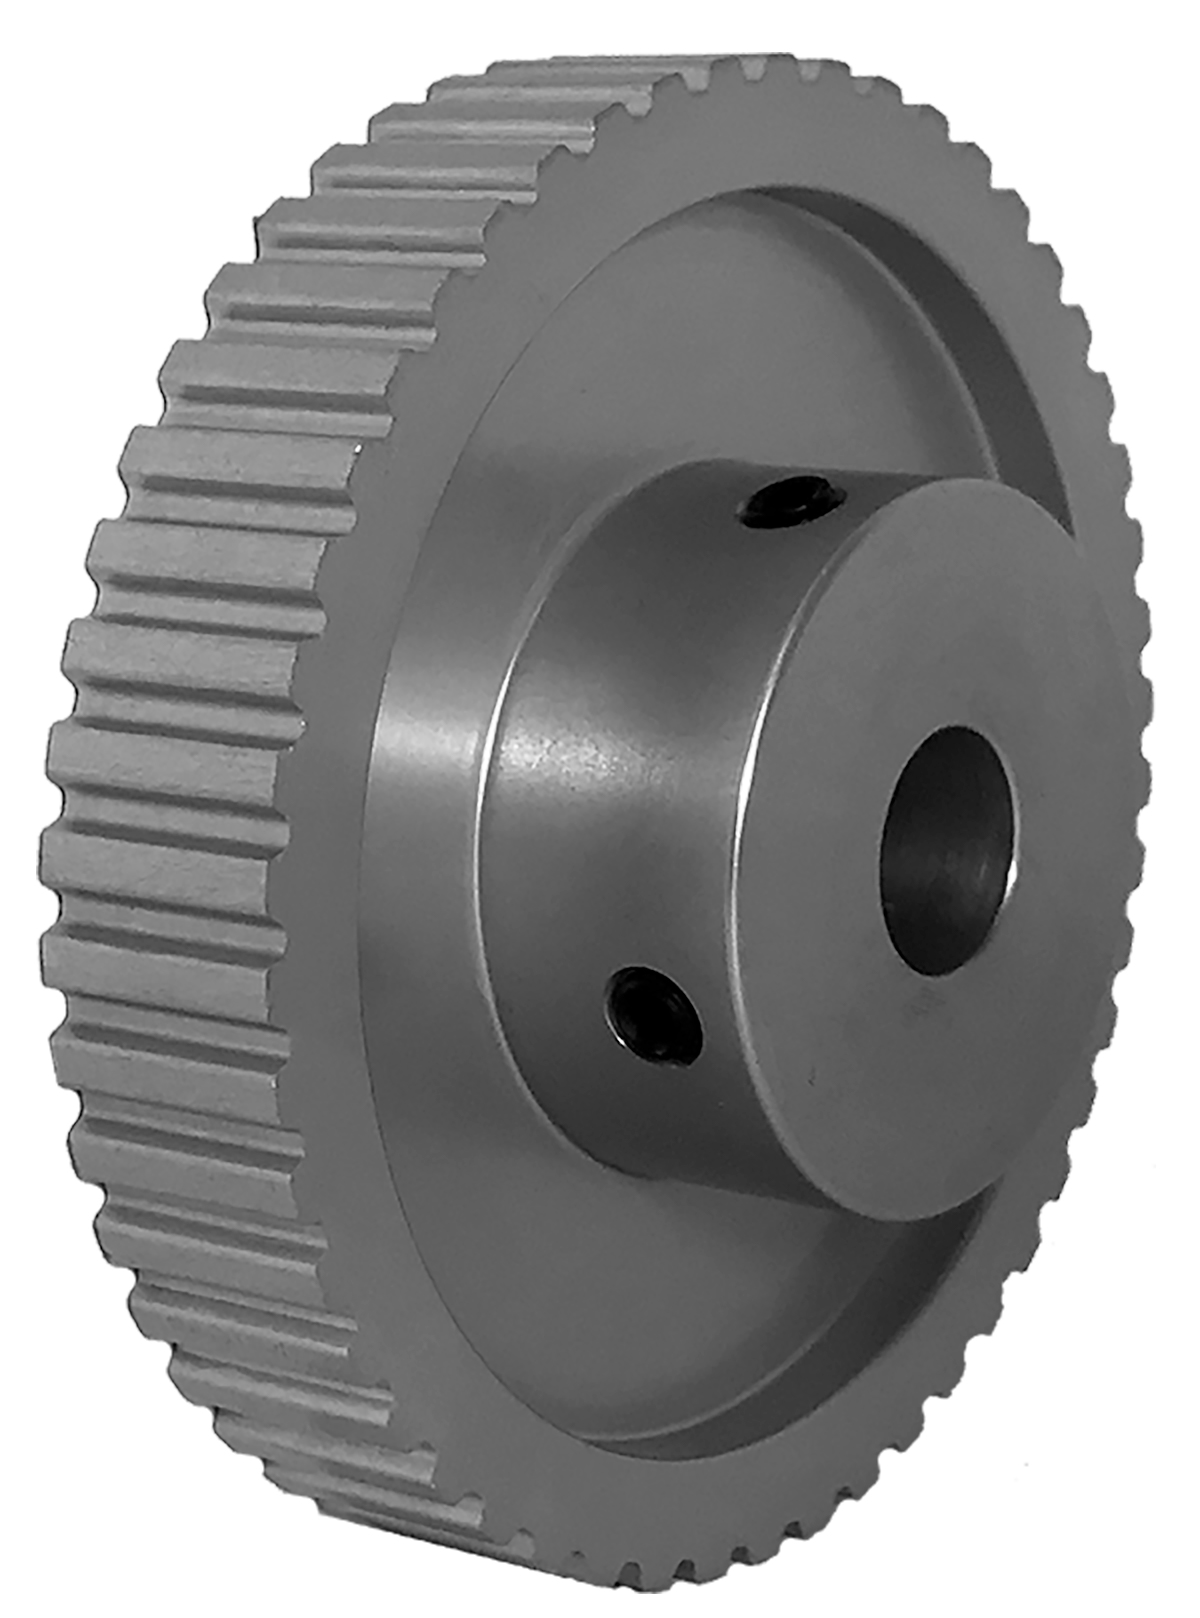 50XL037-6WA6 - Aluminum Imperial Pitch Pulleys